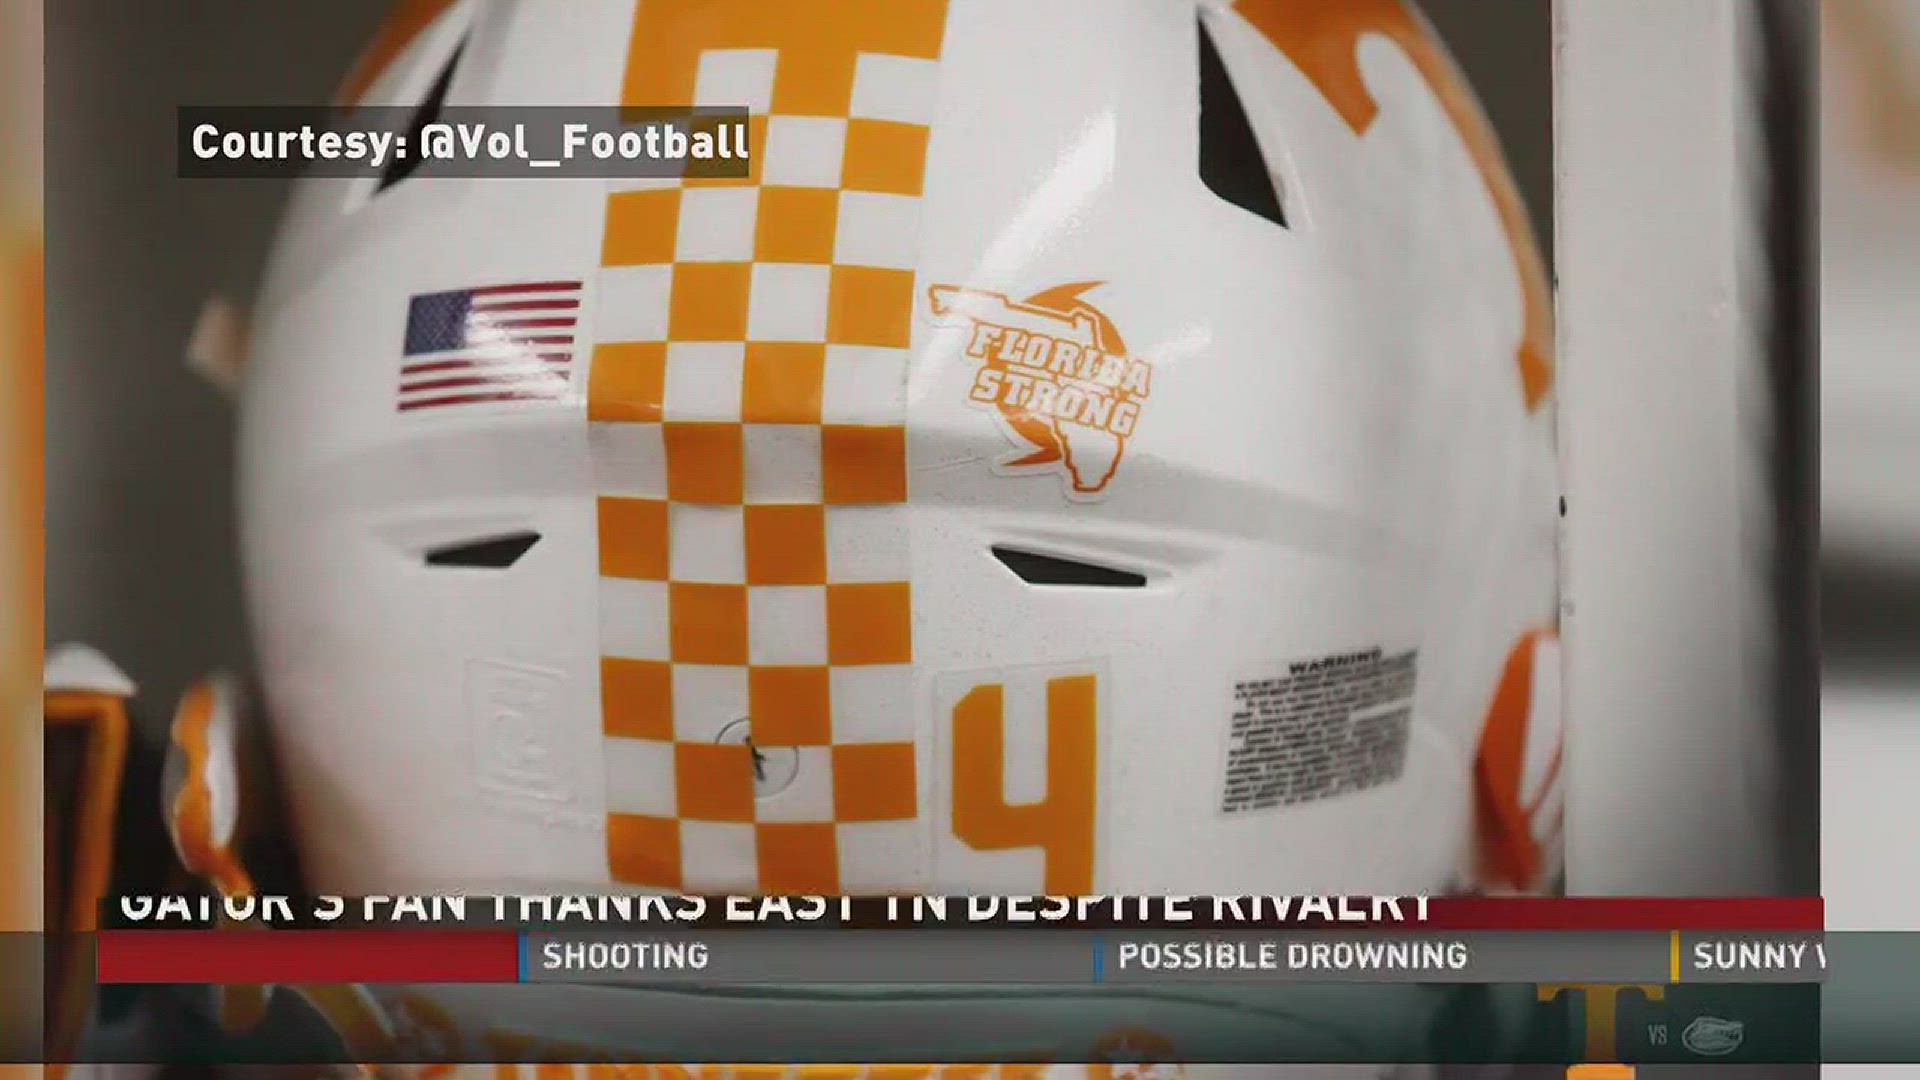 Team 121 stands in solidarity with Florida with helmet stickers.